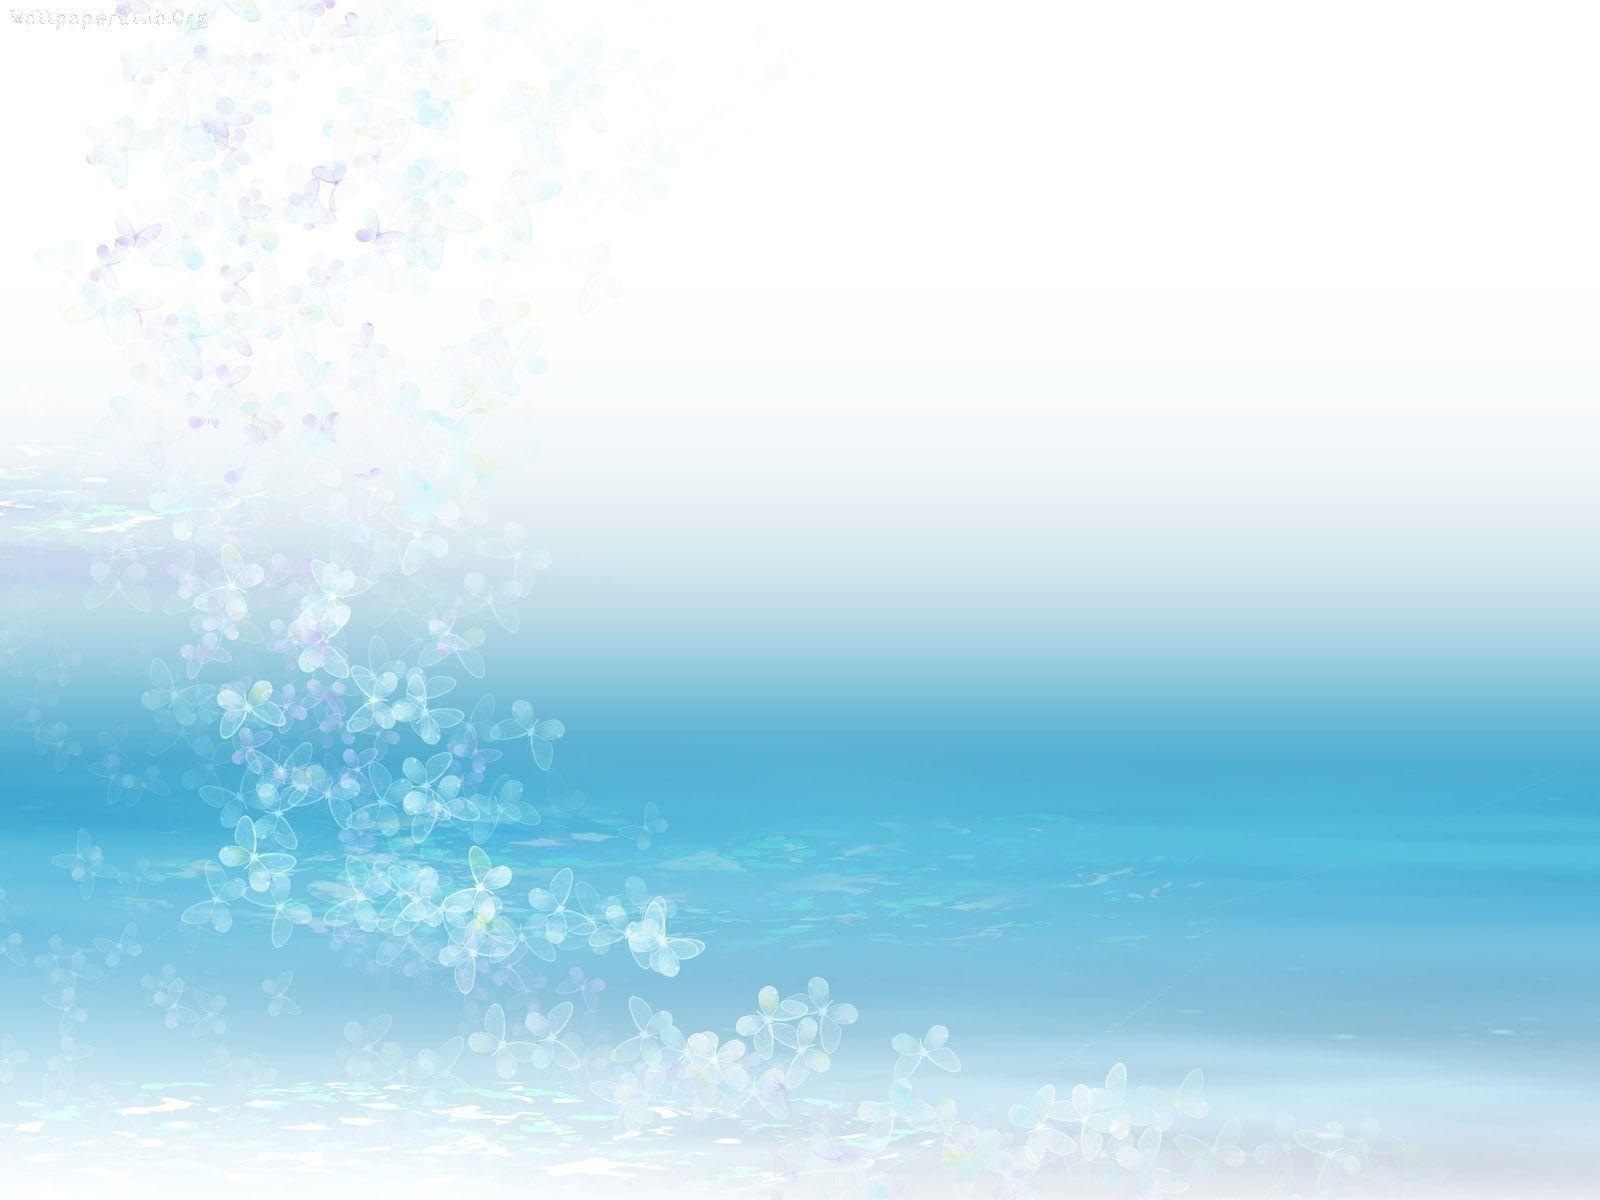 plain background wallpaper 7 - Image And Wallpaper free